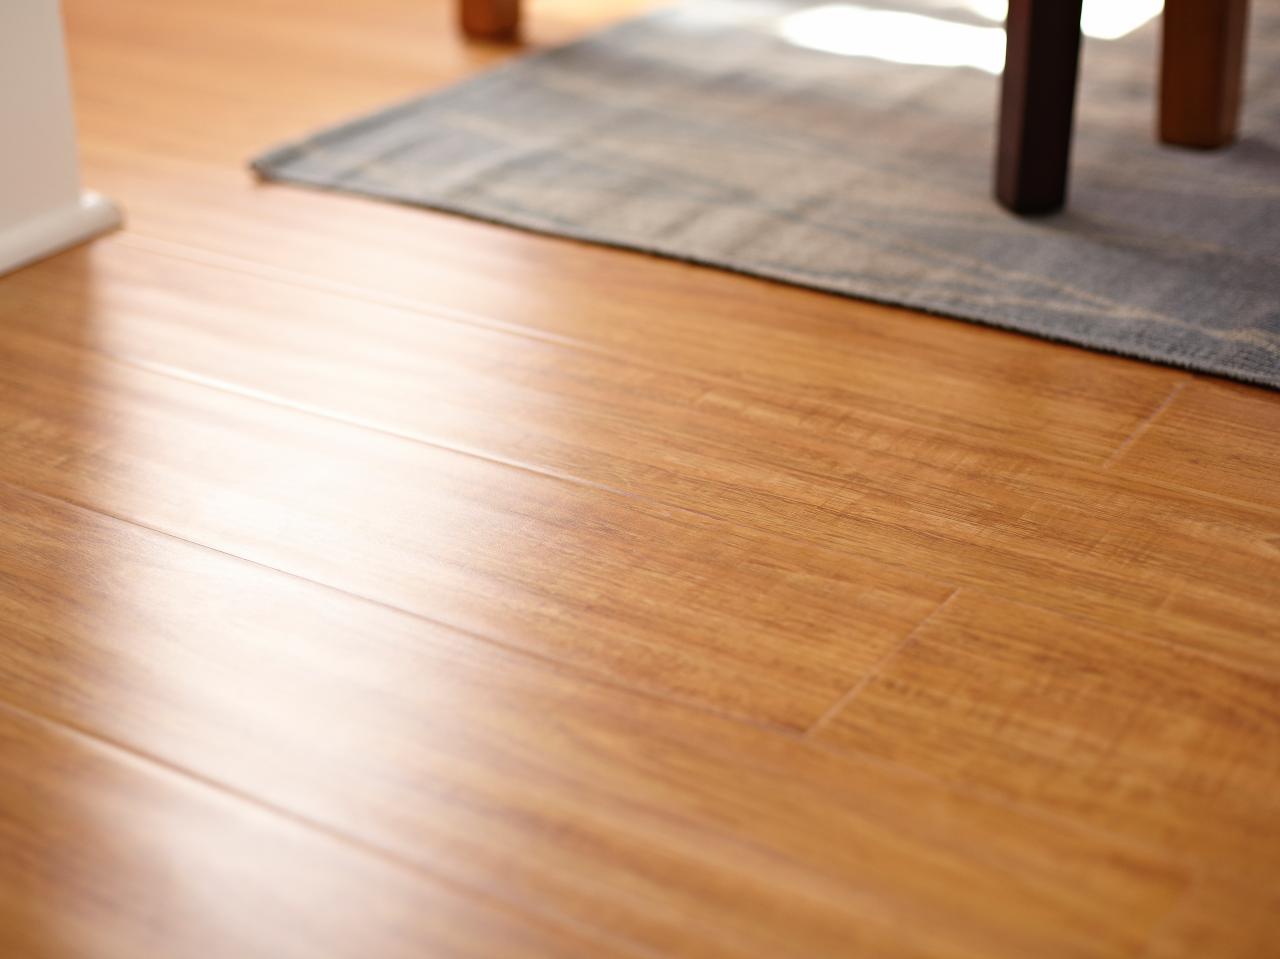 Clean And Maintain Laminate Floors